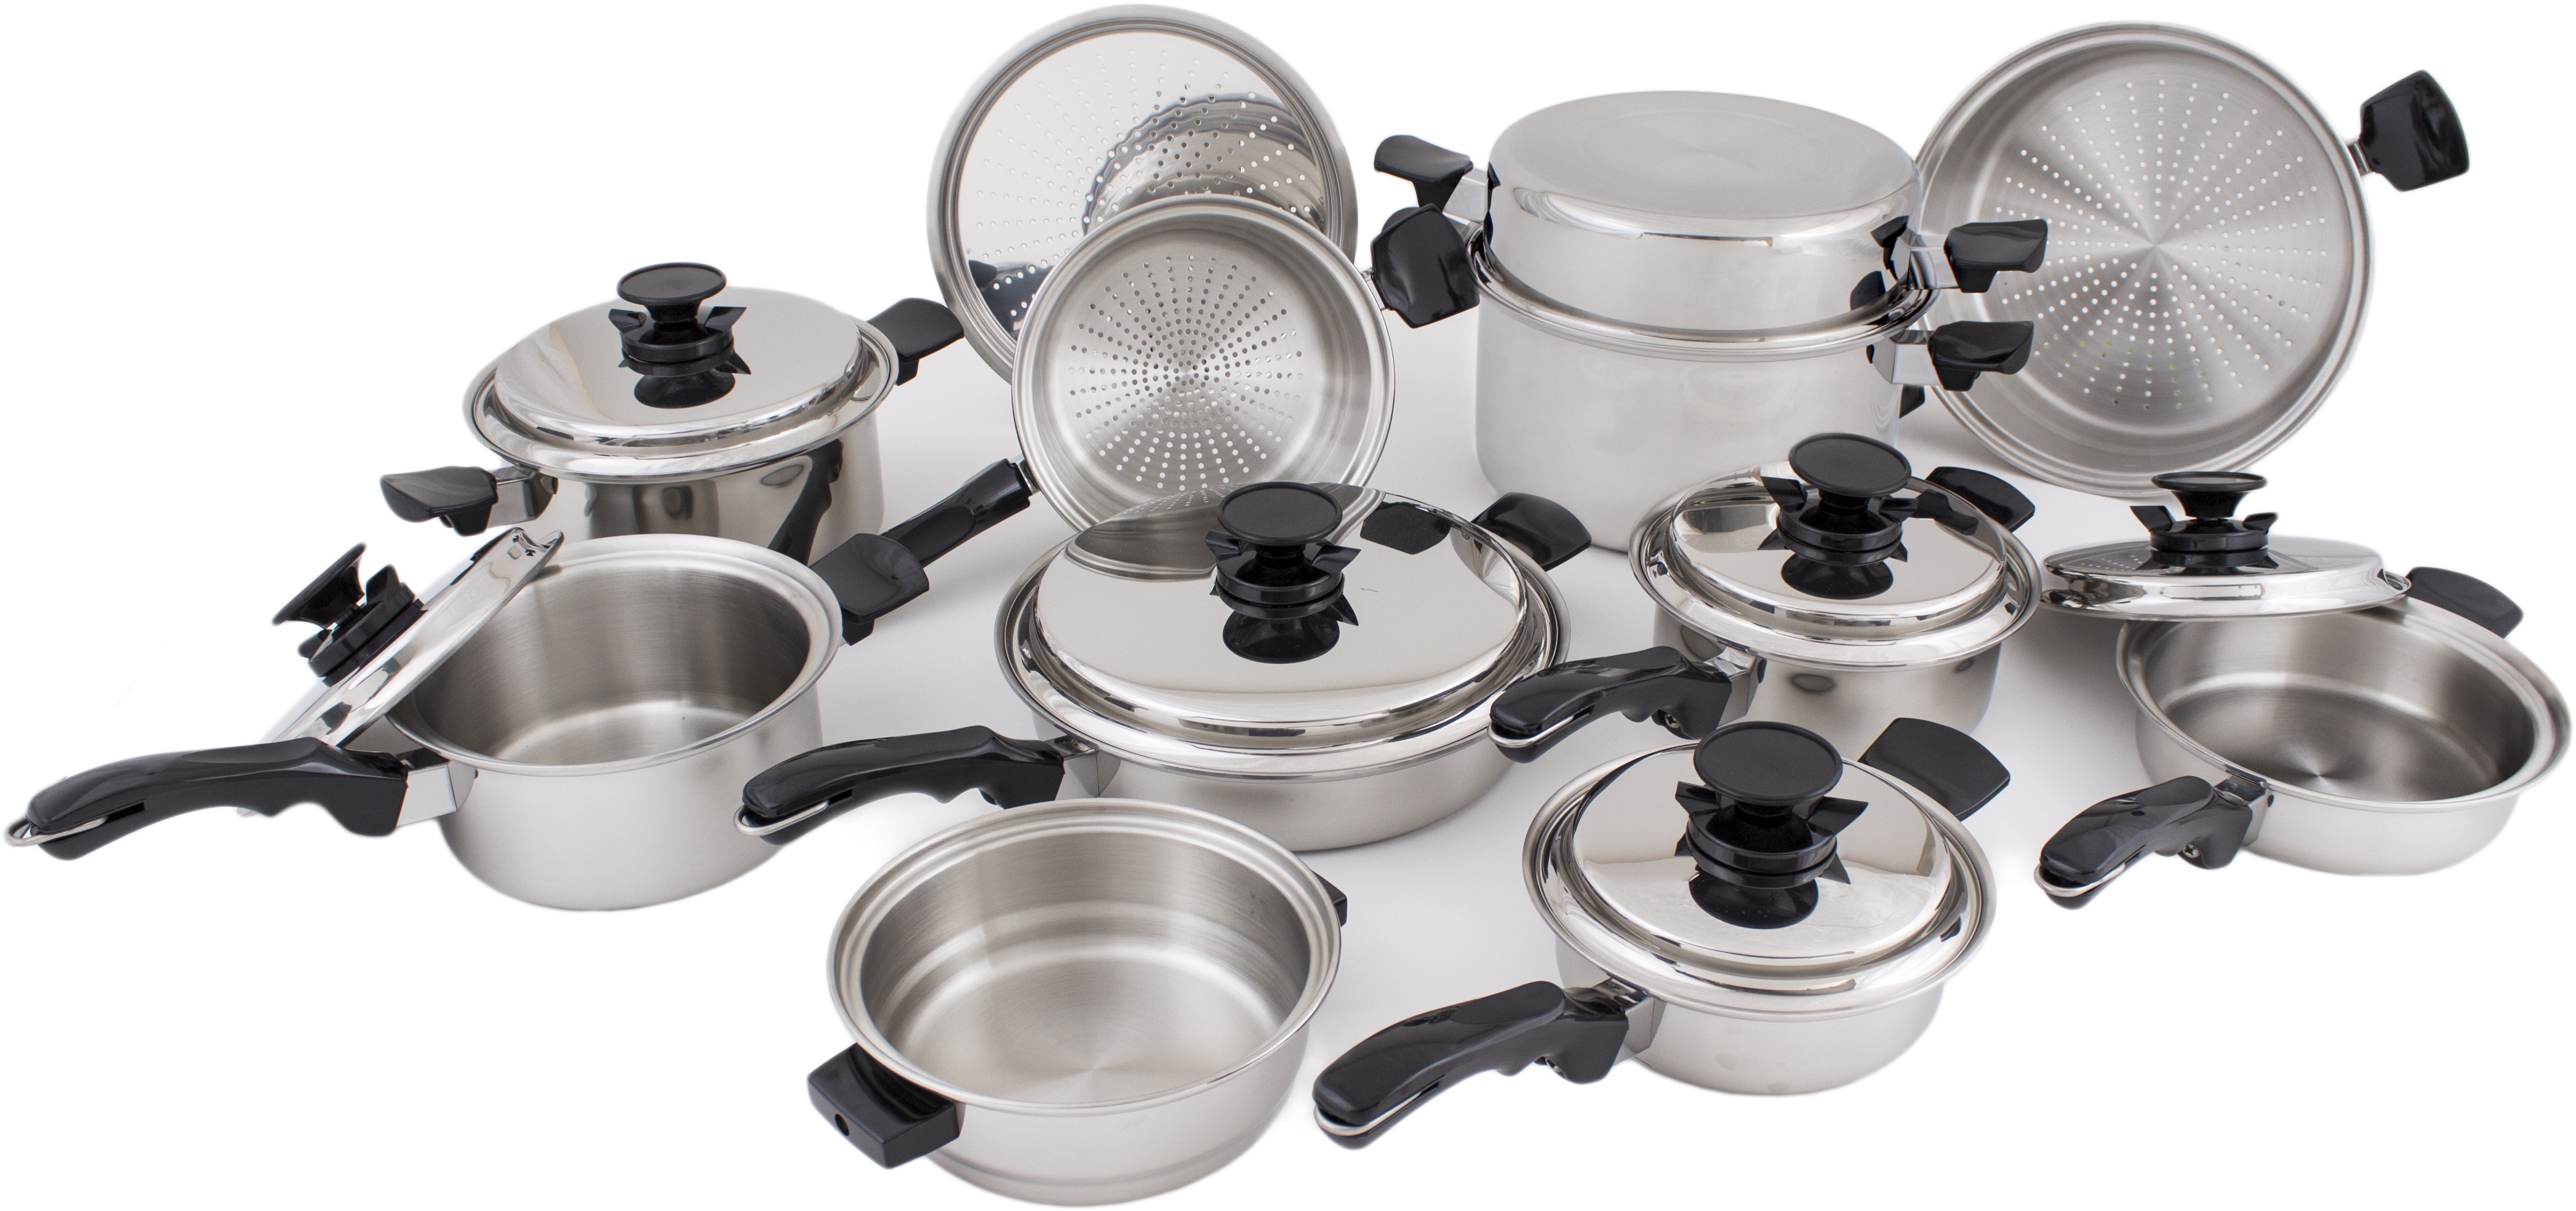 Read More About Belkraft Cookware Prices thumbnail